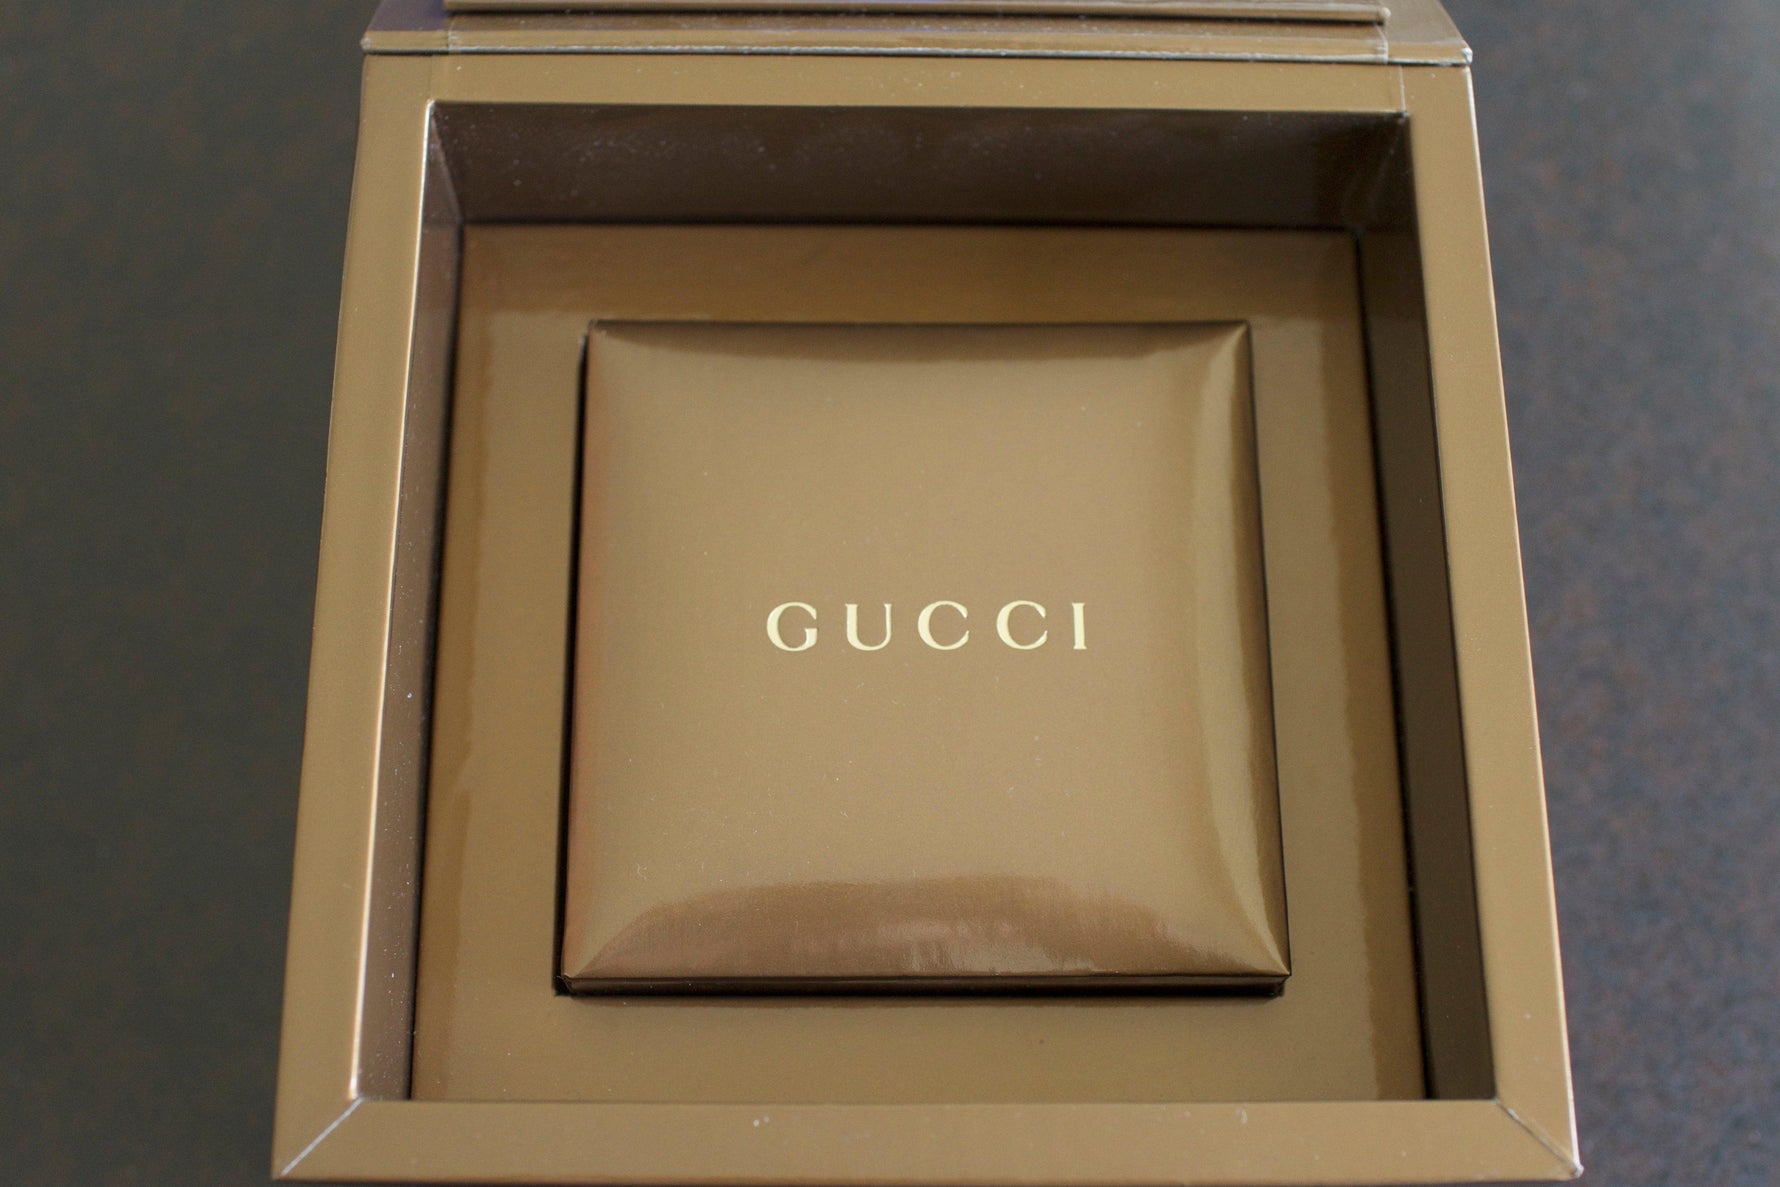 SOLDOUT: Gucci Pantheon Chronograph - WearingTime Luxury Watches